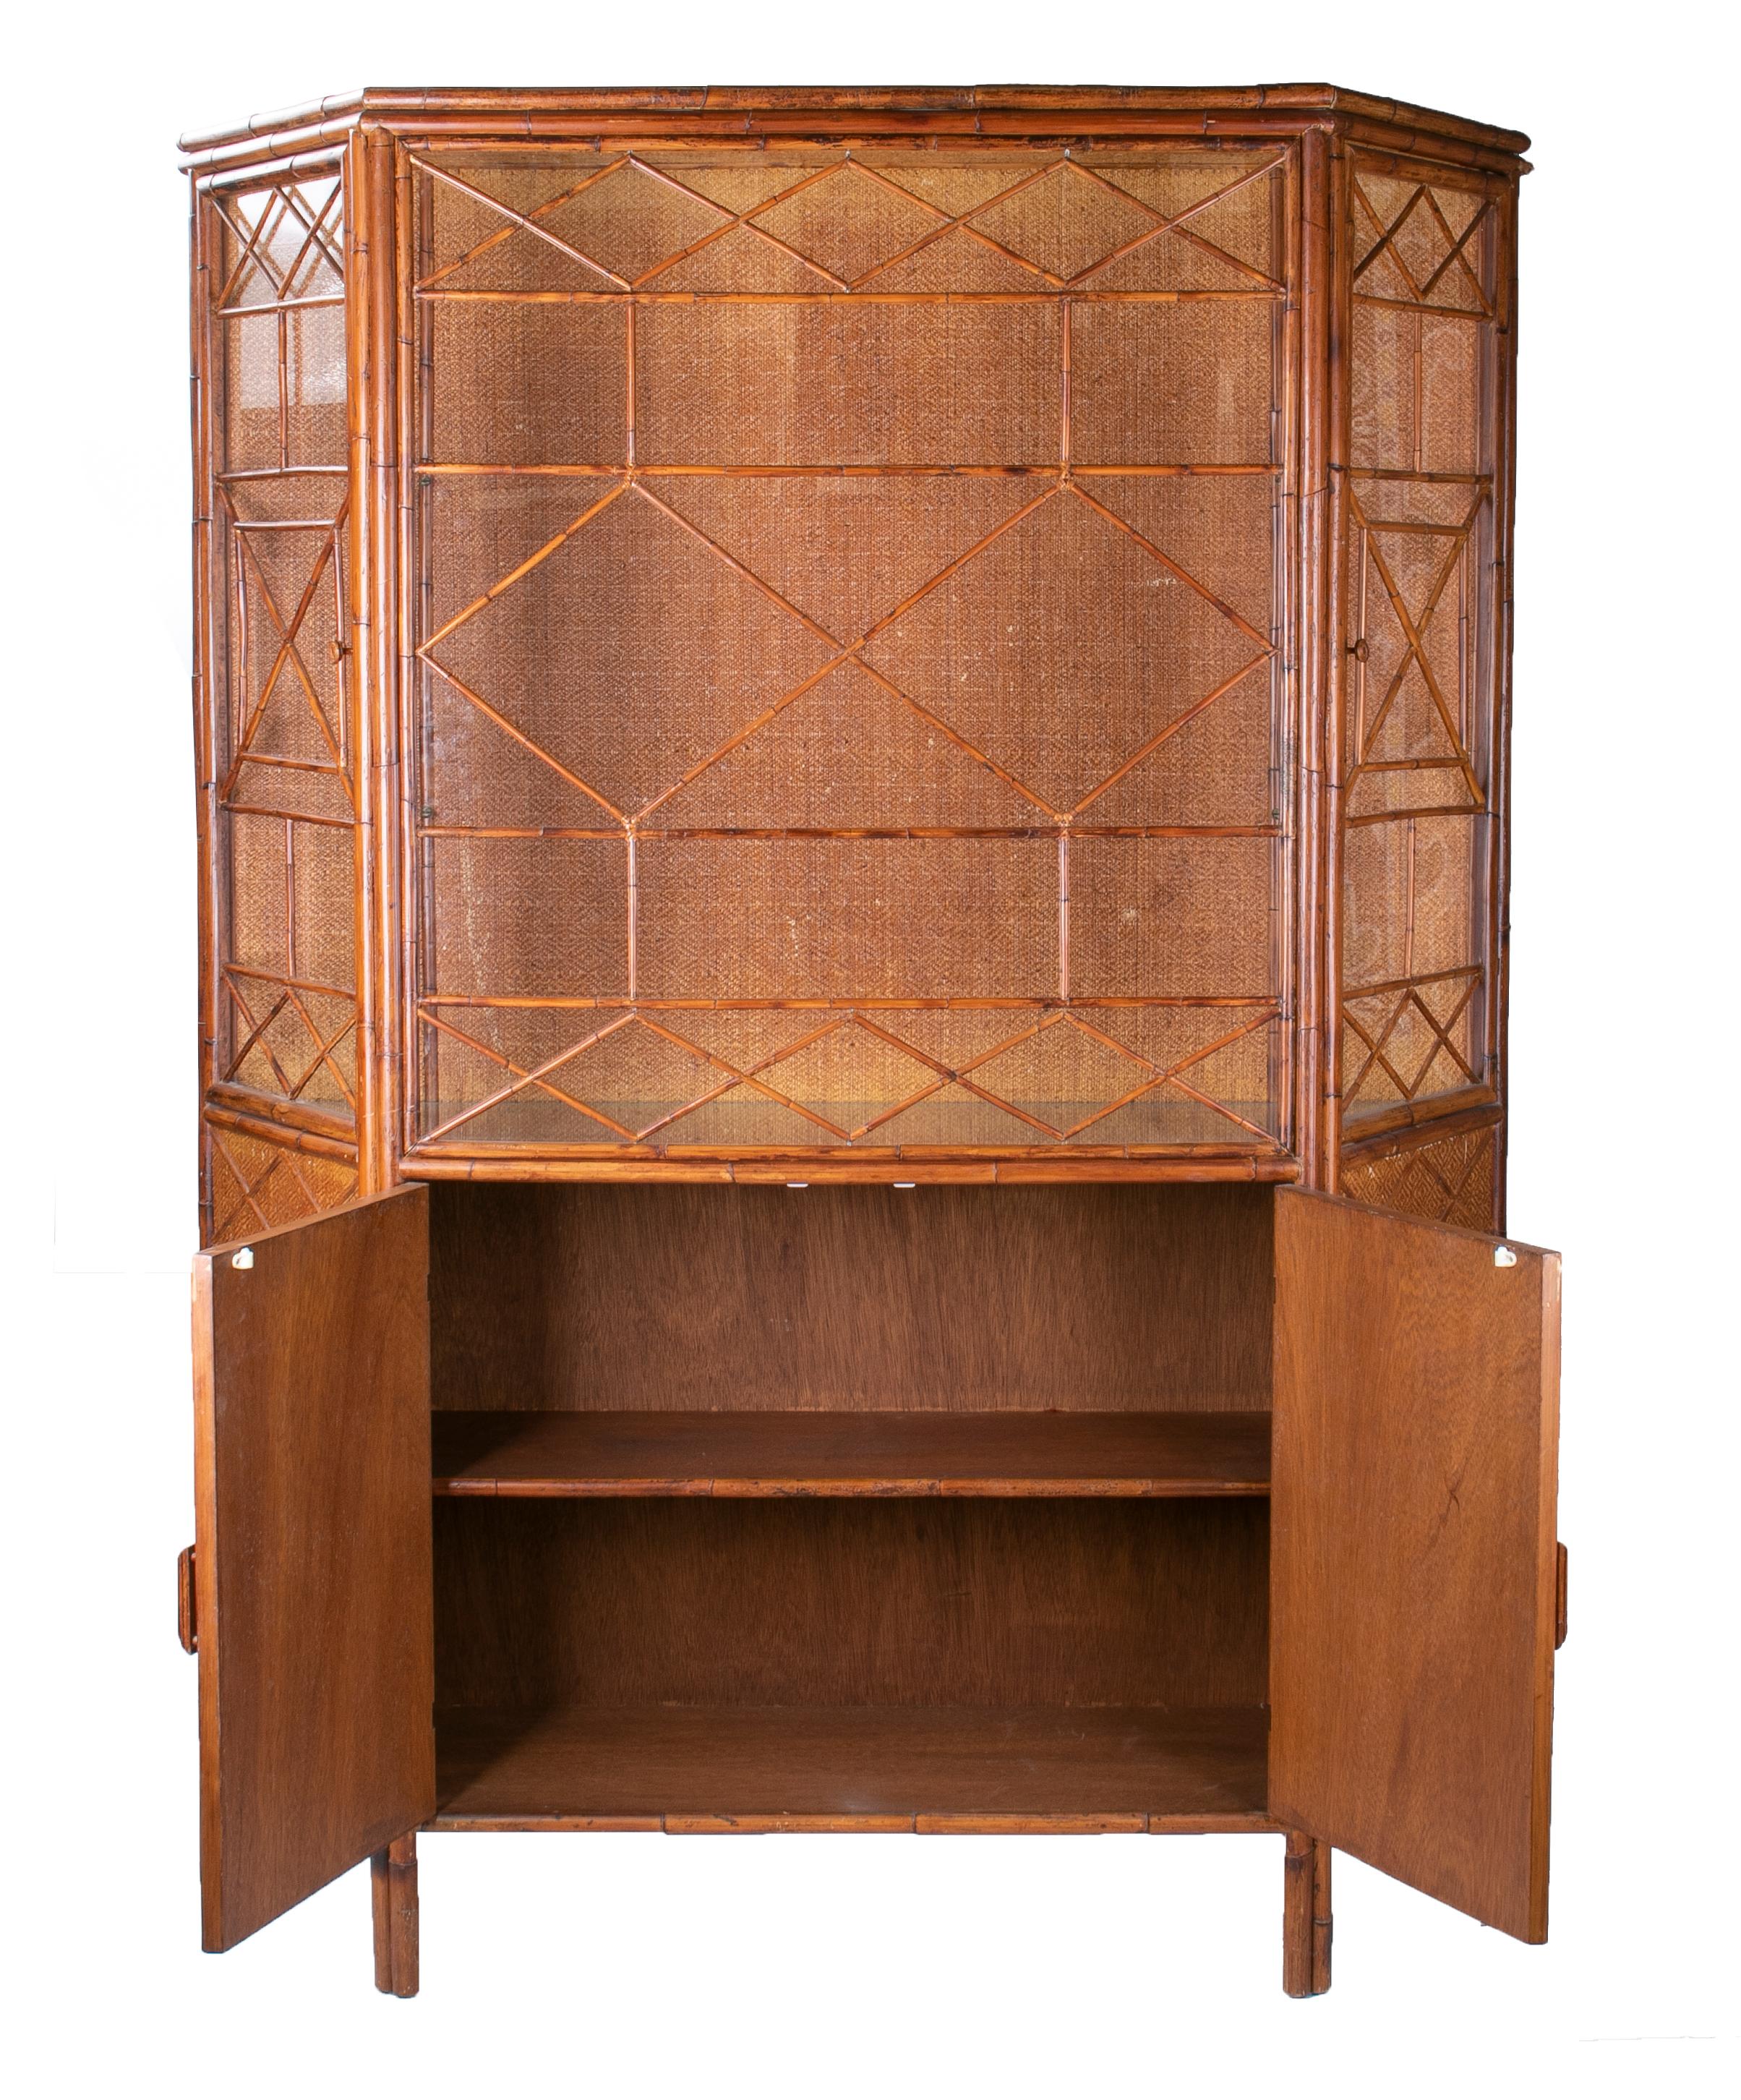 1950s English bamboo and rattan glass cabinet.